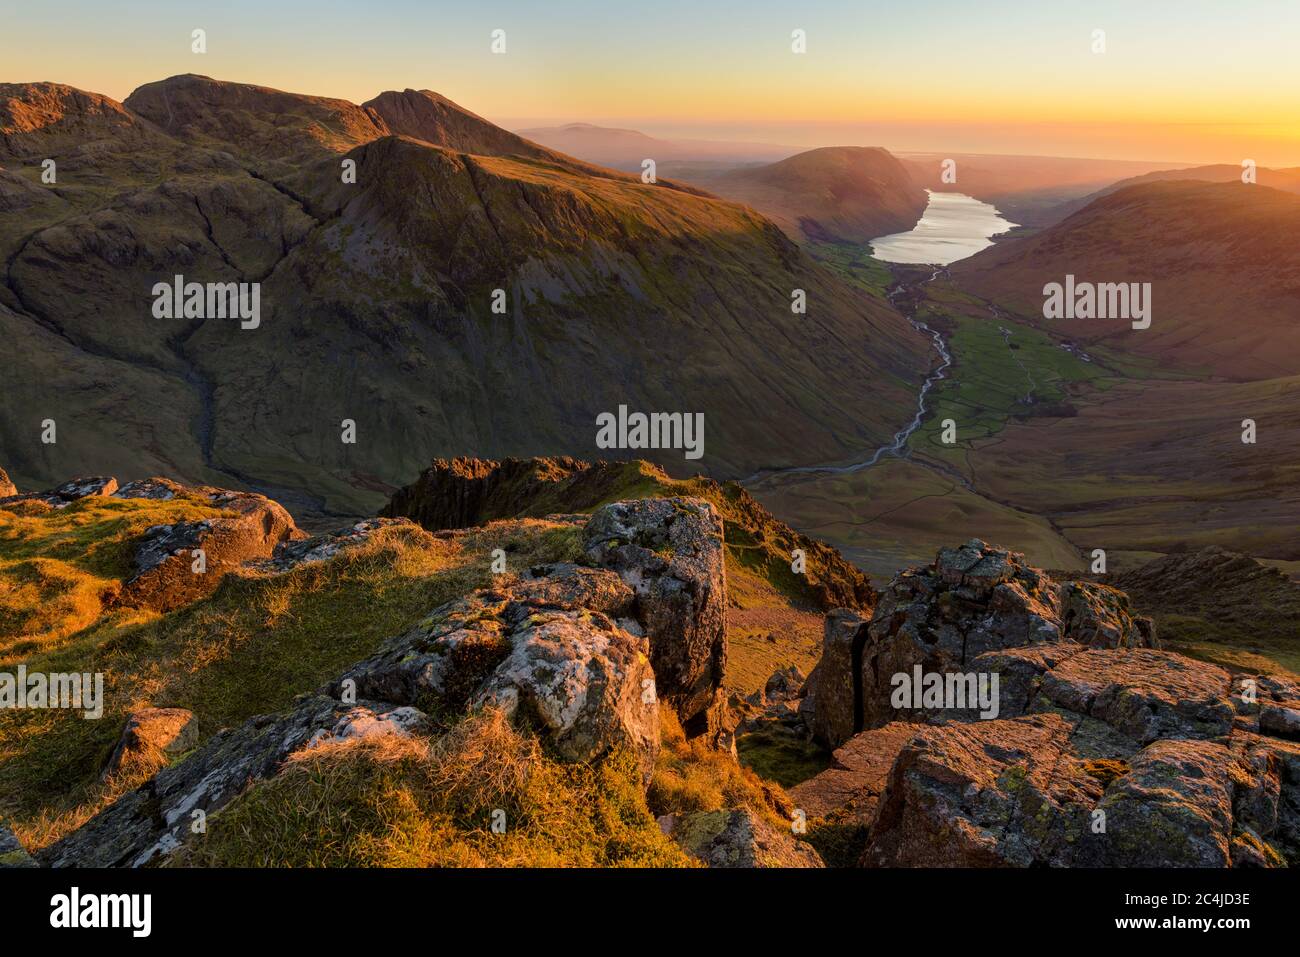 Beautiful Sunset High Up In Mountains With Wastwater Lake In Distance, Lake District, UK. Stock Photo